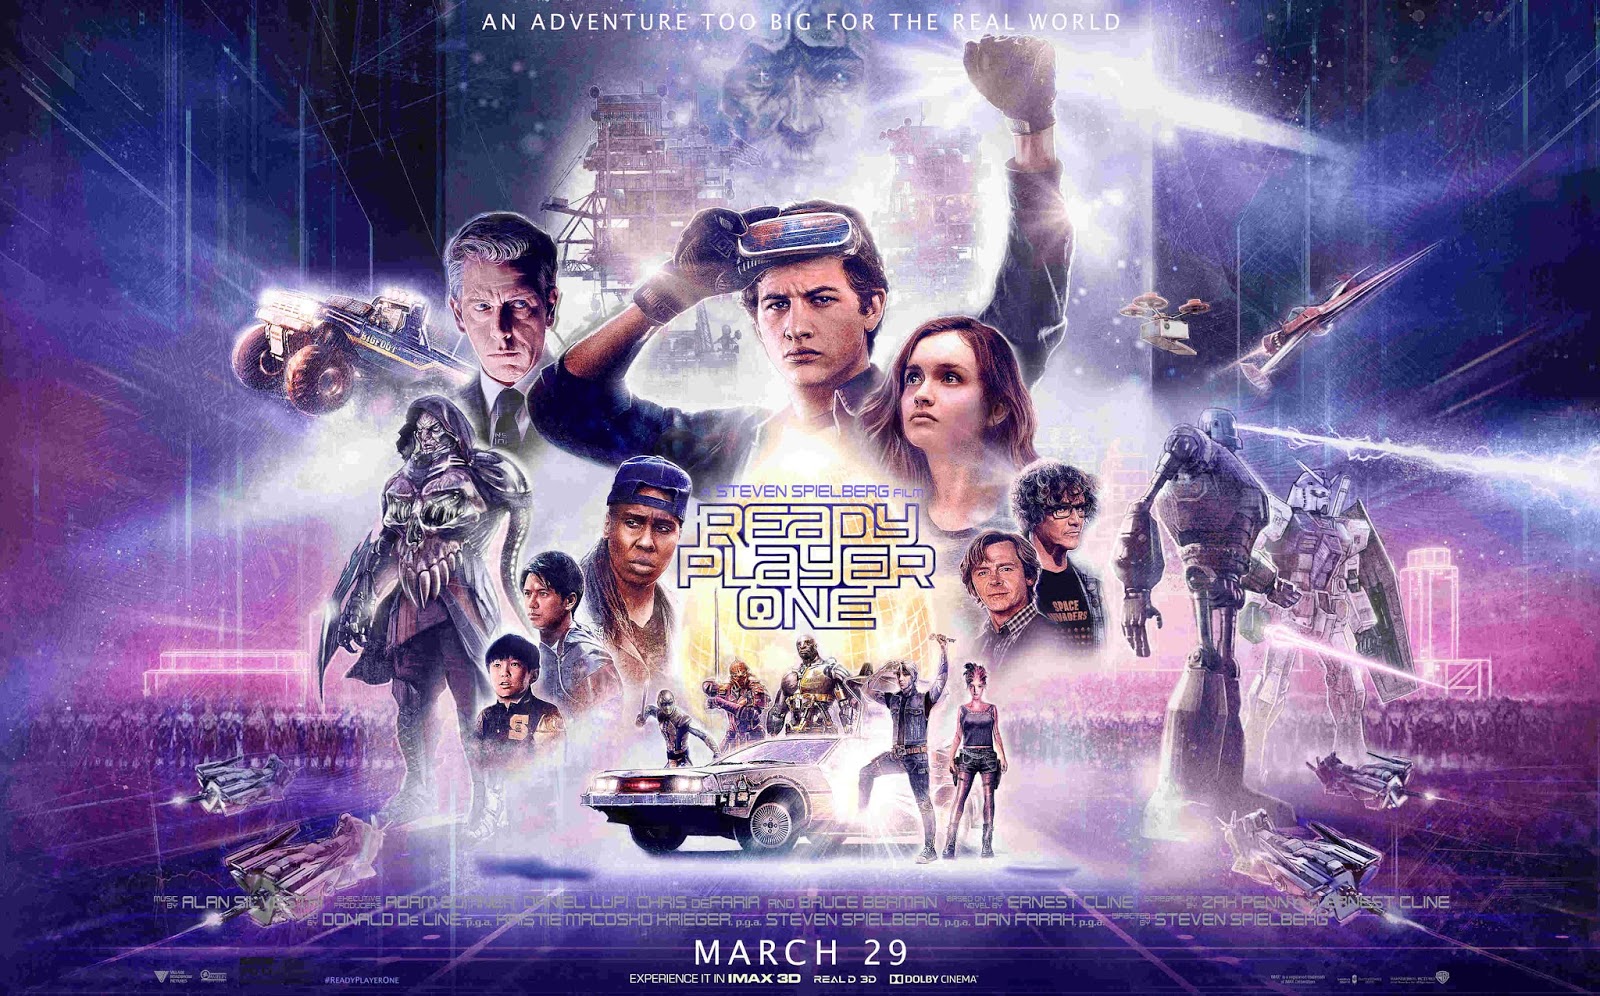 Steven Spielberg's Ready Player One movie review